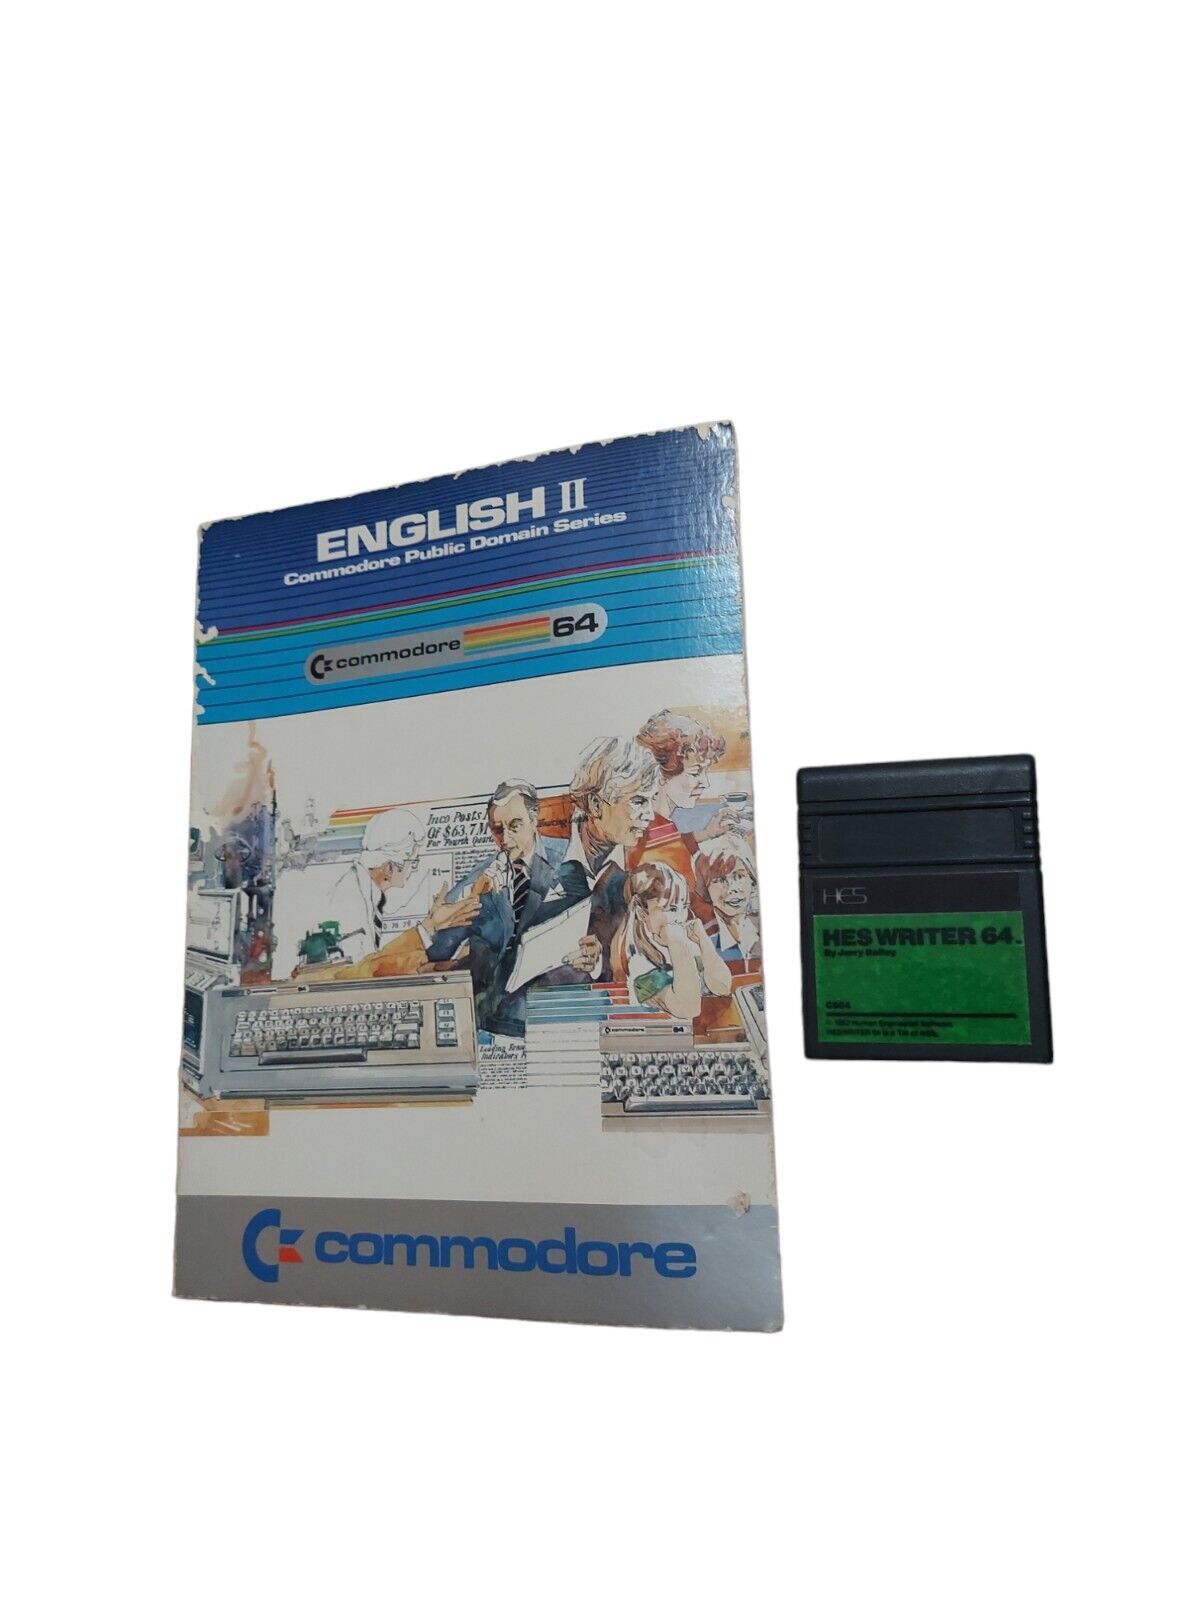 1980s Vintage Commodore lot -HES Writer 64 computer cartridge and English Disk